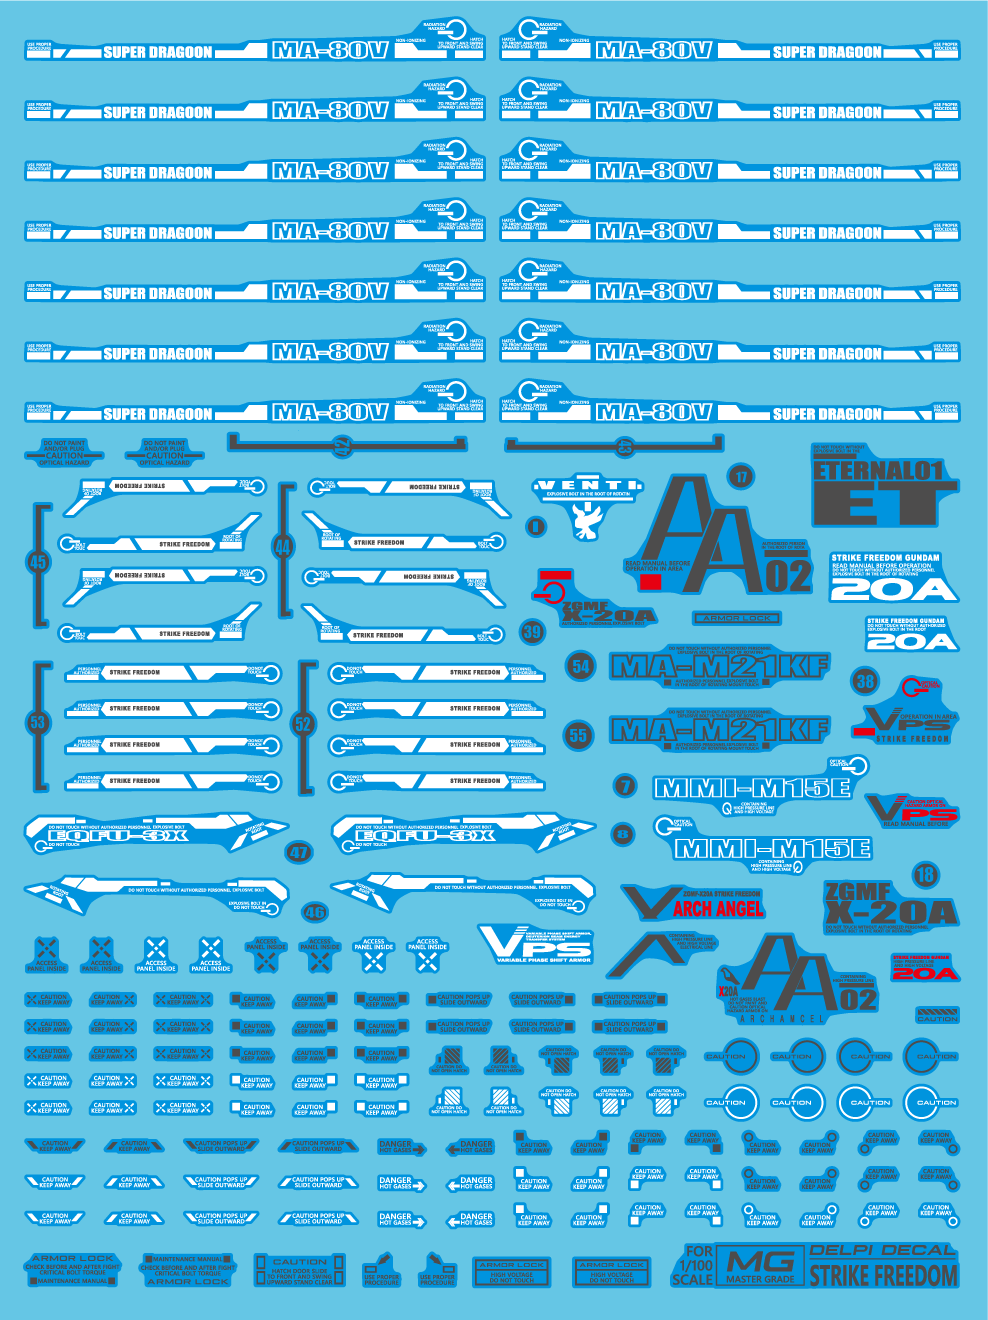 Delpi - MG STRIKE FREEDOM WATER DECAL - Select Normal or Holo